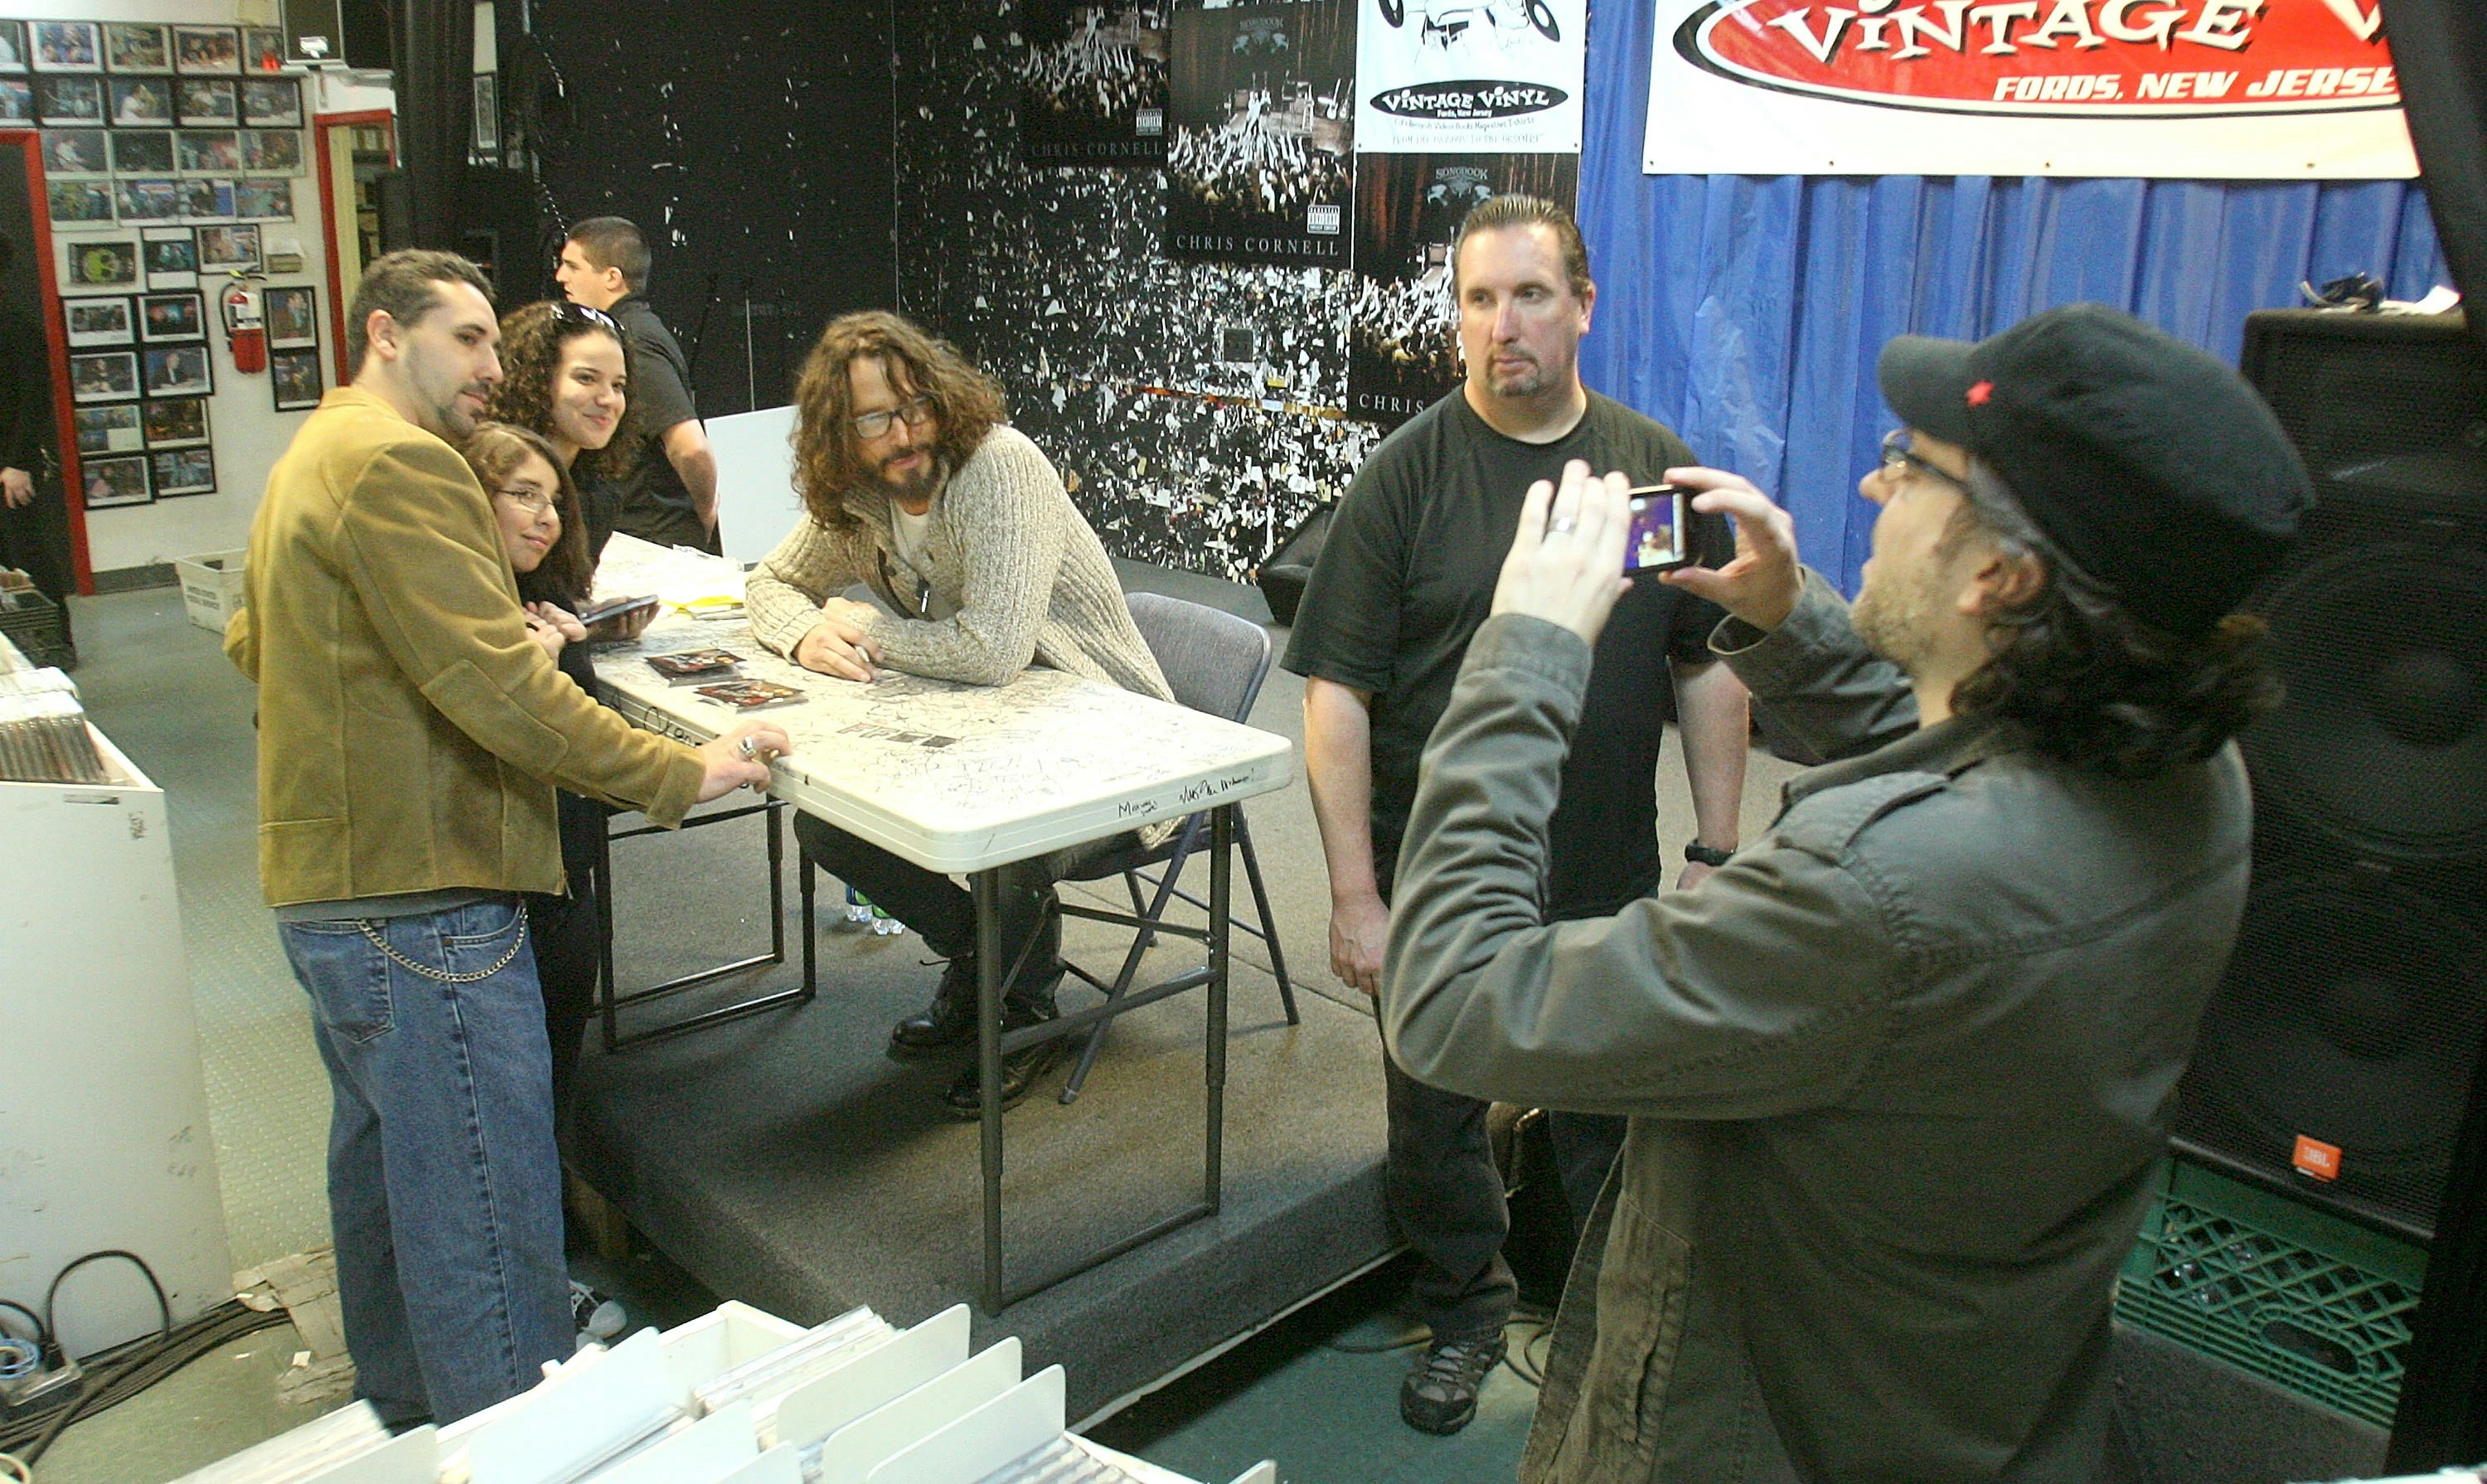 Musician Chris Cornell sits in an oatmeal colored sweater at a white card table in front of a blue backdrop and red and white Vintage Vinyl logo banner as a photographer in a black hat and grey shirt snaps a photo of Cornell with a fan in a tan jacket and jeans at a promotional event in 2011.